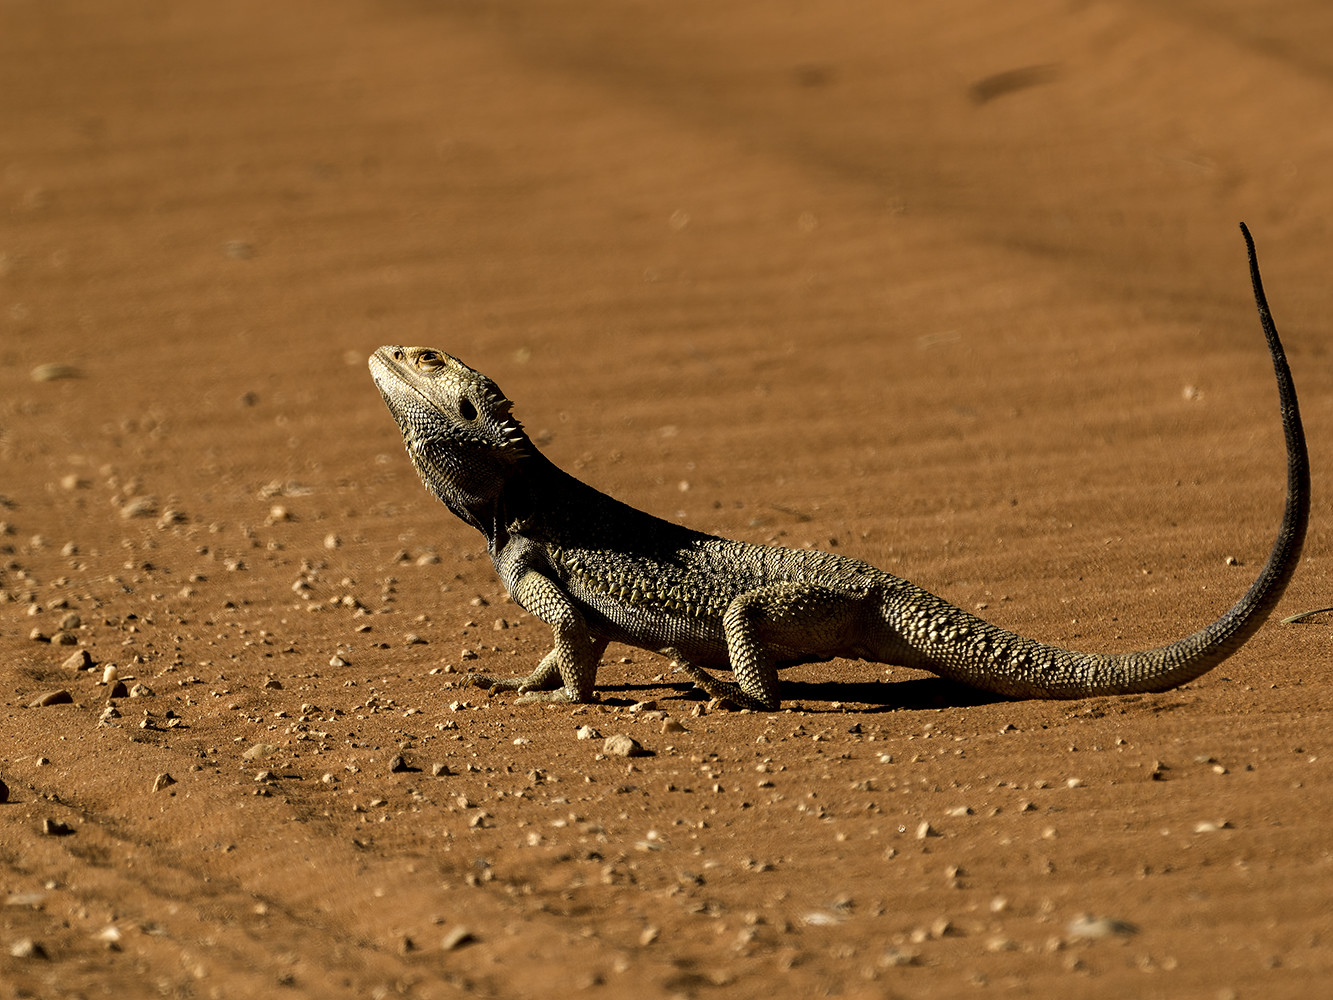 A bearded dragon looking contemplative in an expanse of desert.